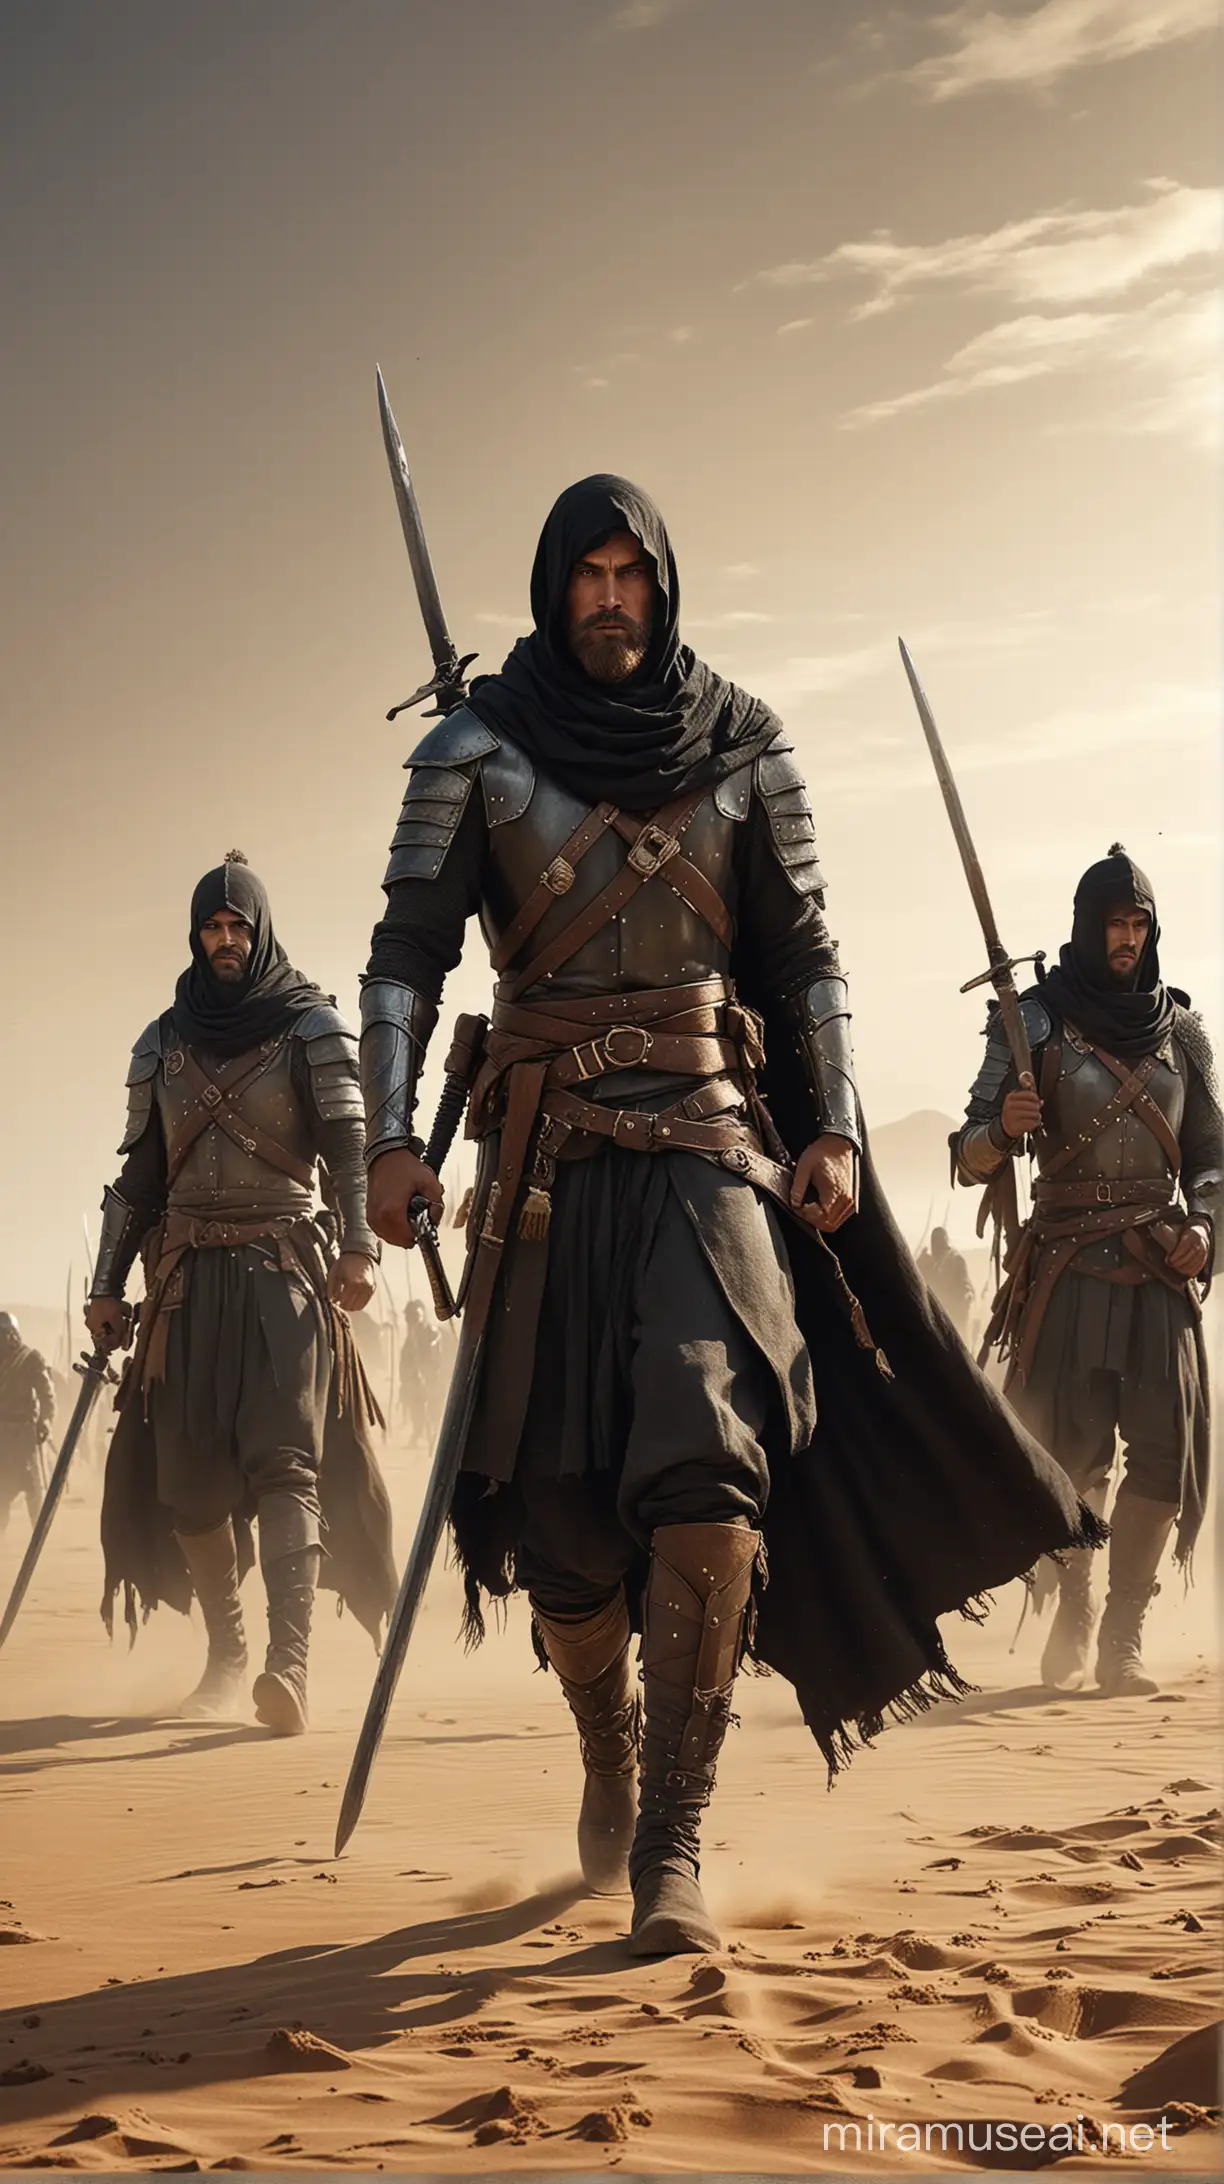  warriors dressed in medieval war clothing, with a black scarf over their heads, and holding their swords high, stand on a field of desert sand, Digital painting, atmospheric mood, realistic V6, medium beard and msutache